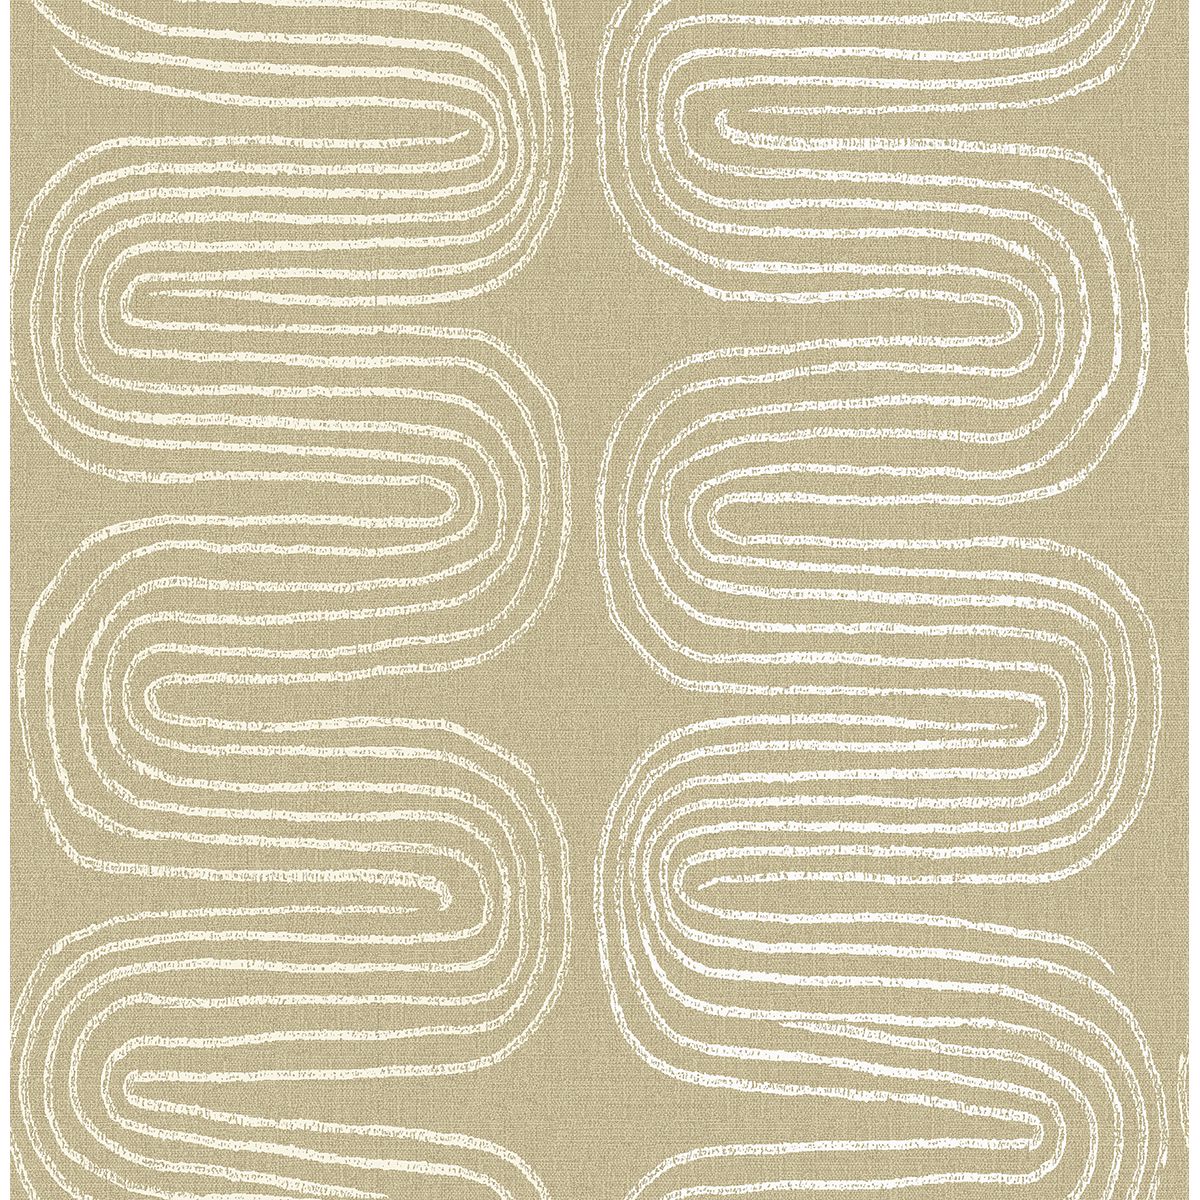 Picture of Zephyr Honey Abstract Stripe Wallpaper